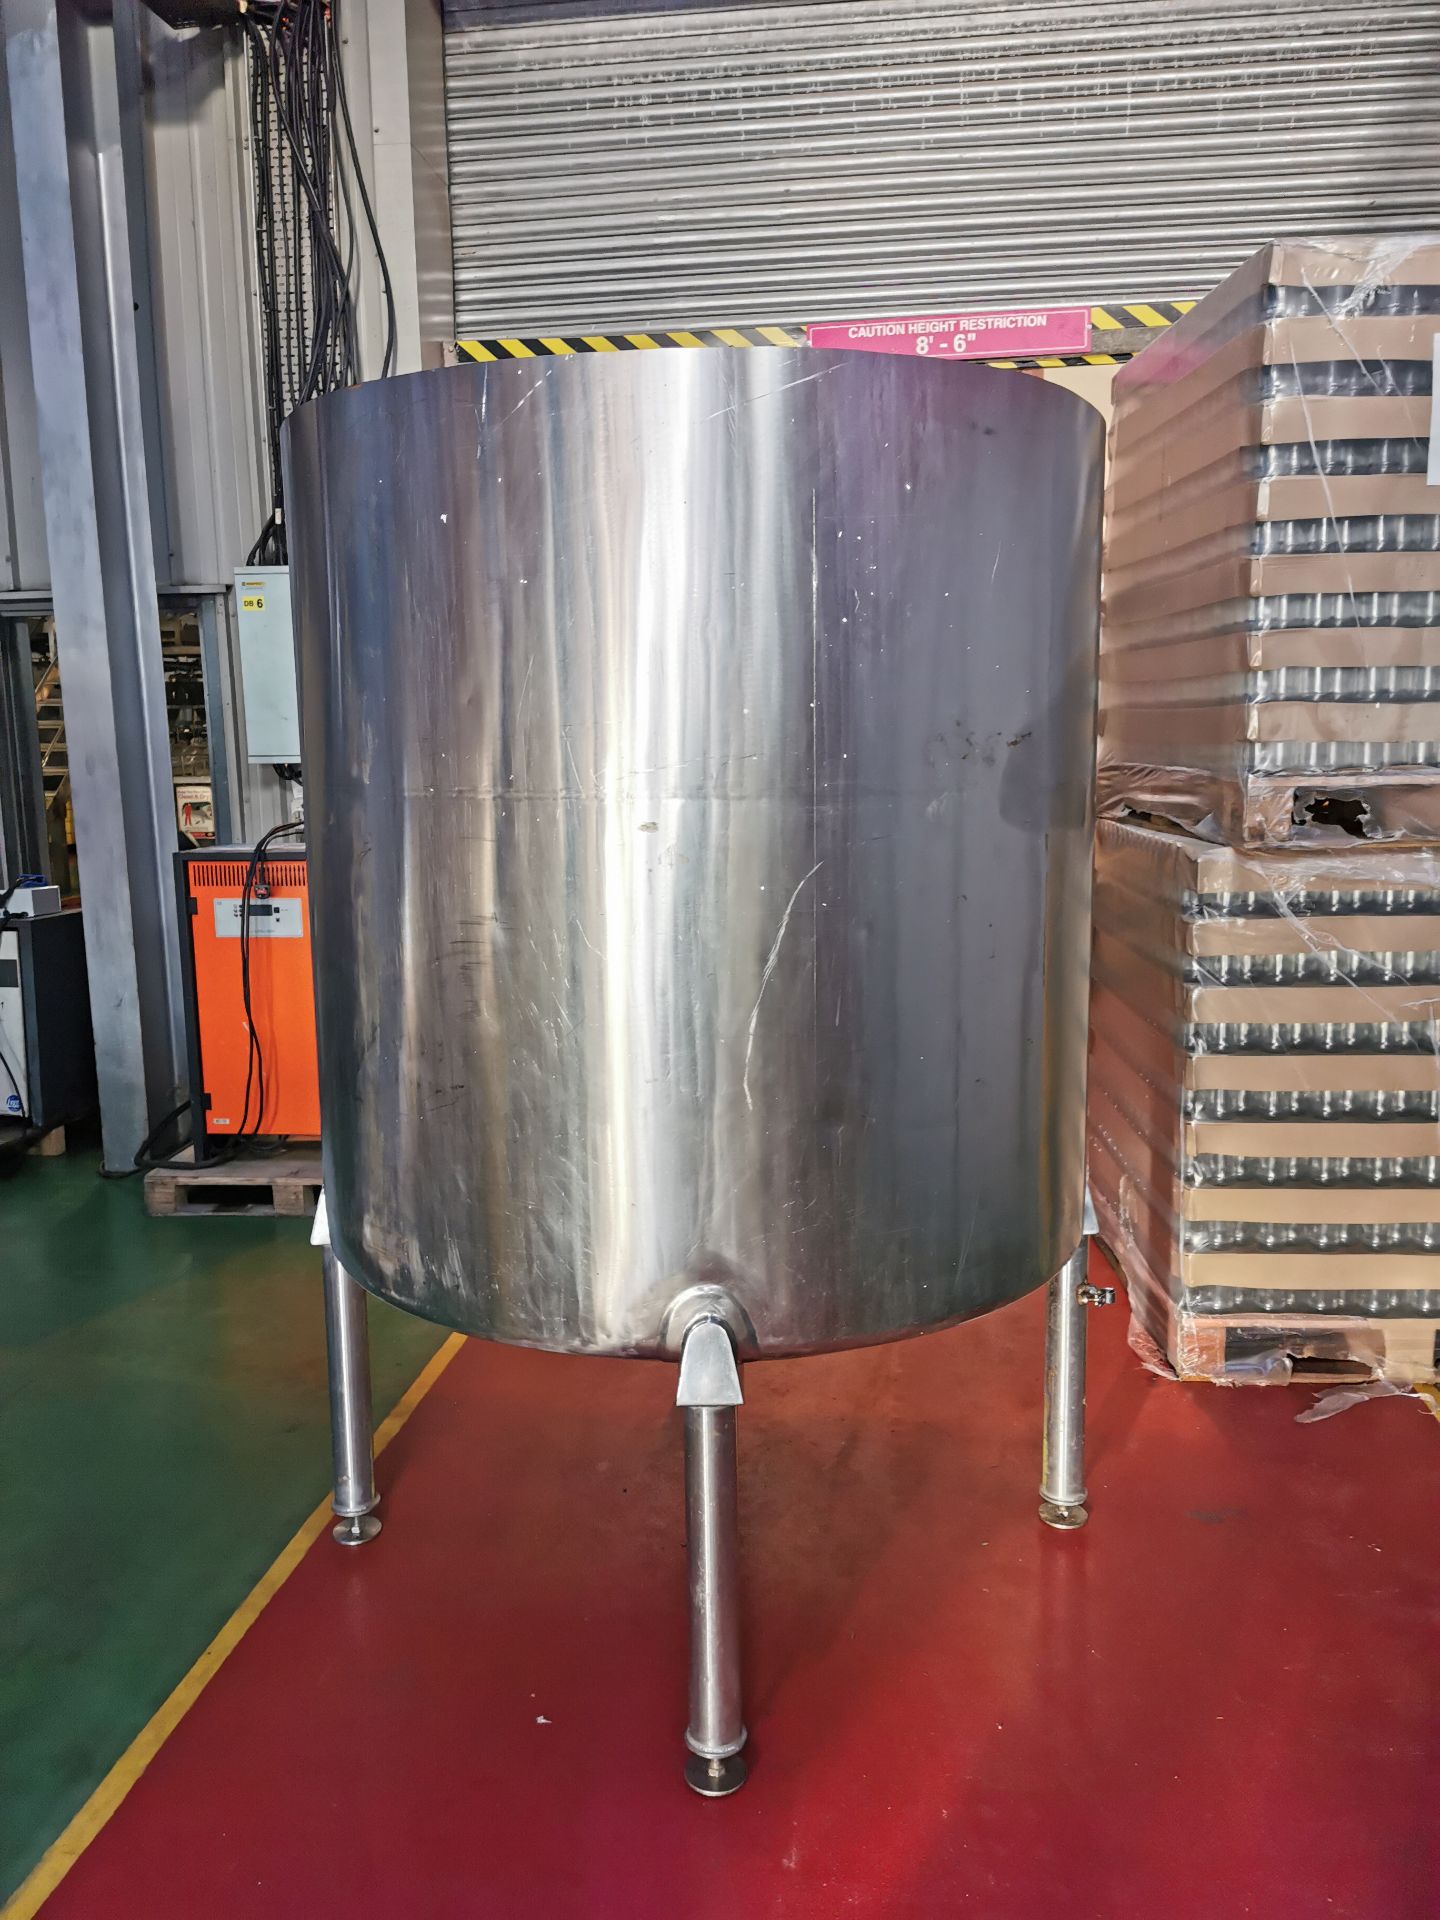 STAINLESS STEEL VESSEL, approx. 1.3m dia. x 2.25m